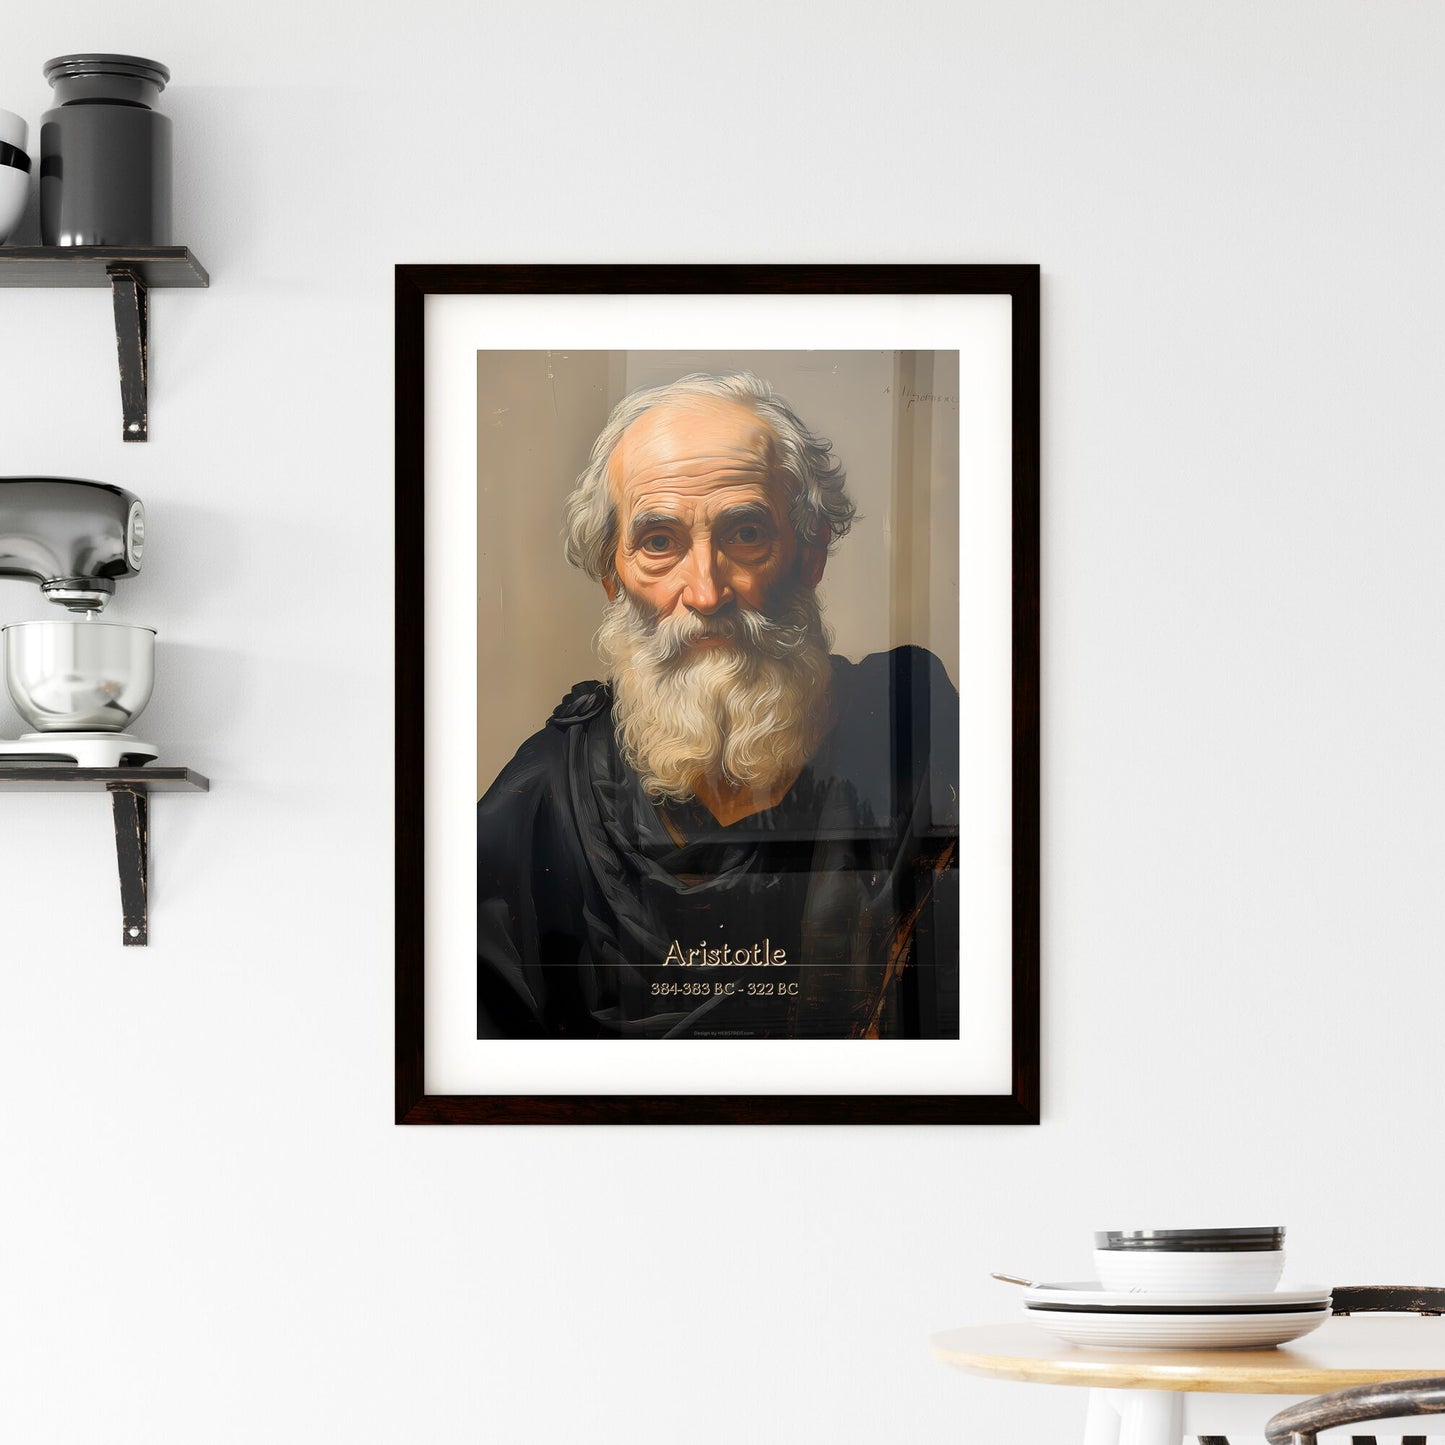 Aristotle, 384-383 BC - 322 BC, A Poster of a man with a white beard Default Title